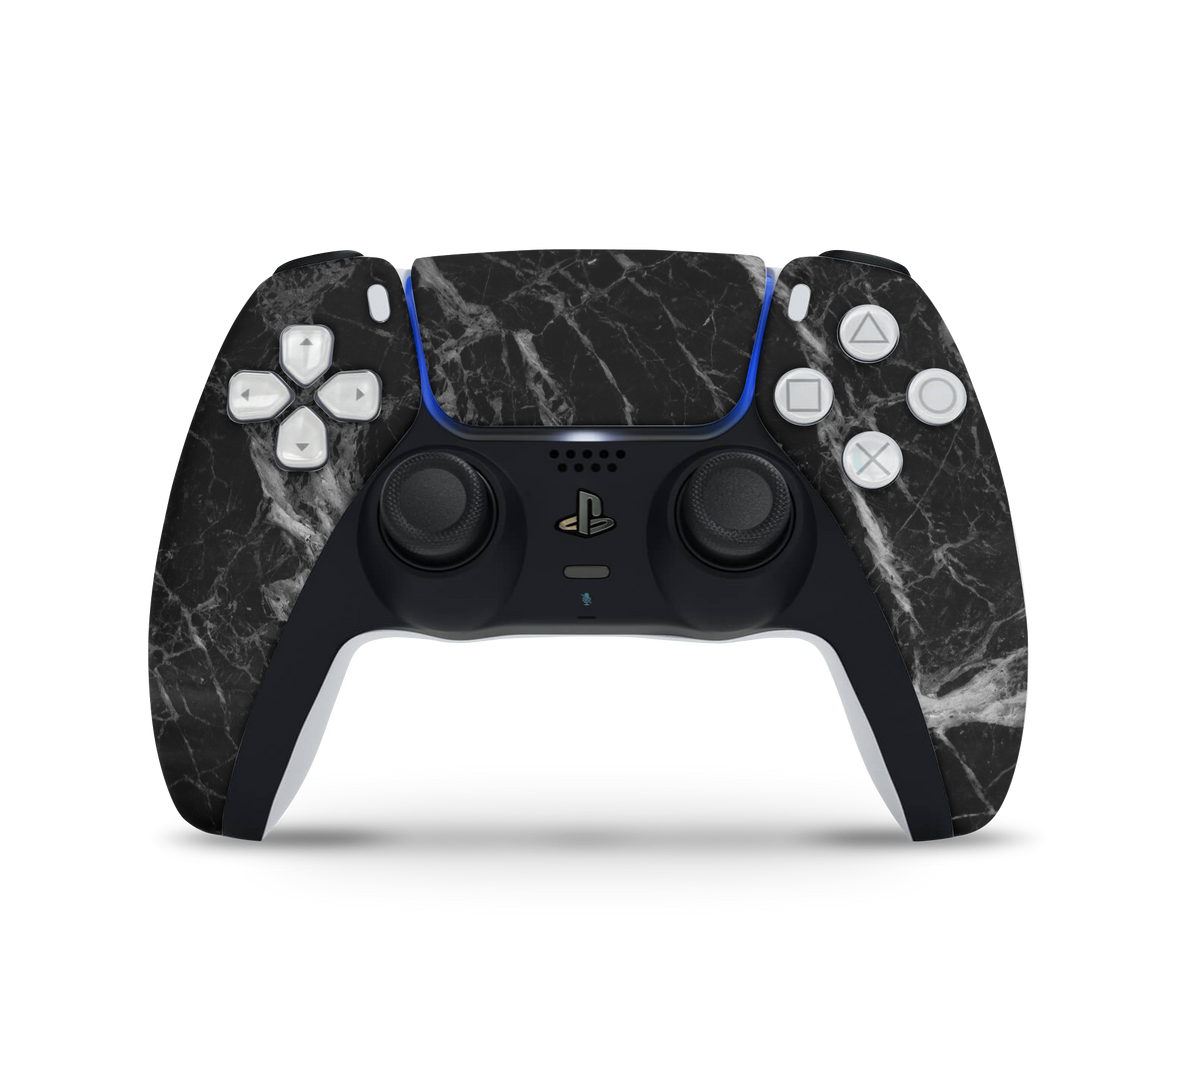 PlayStation 5 Controller Black Marble